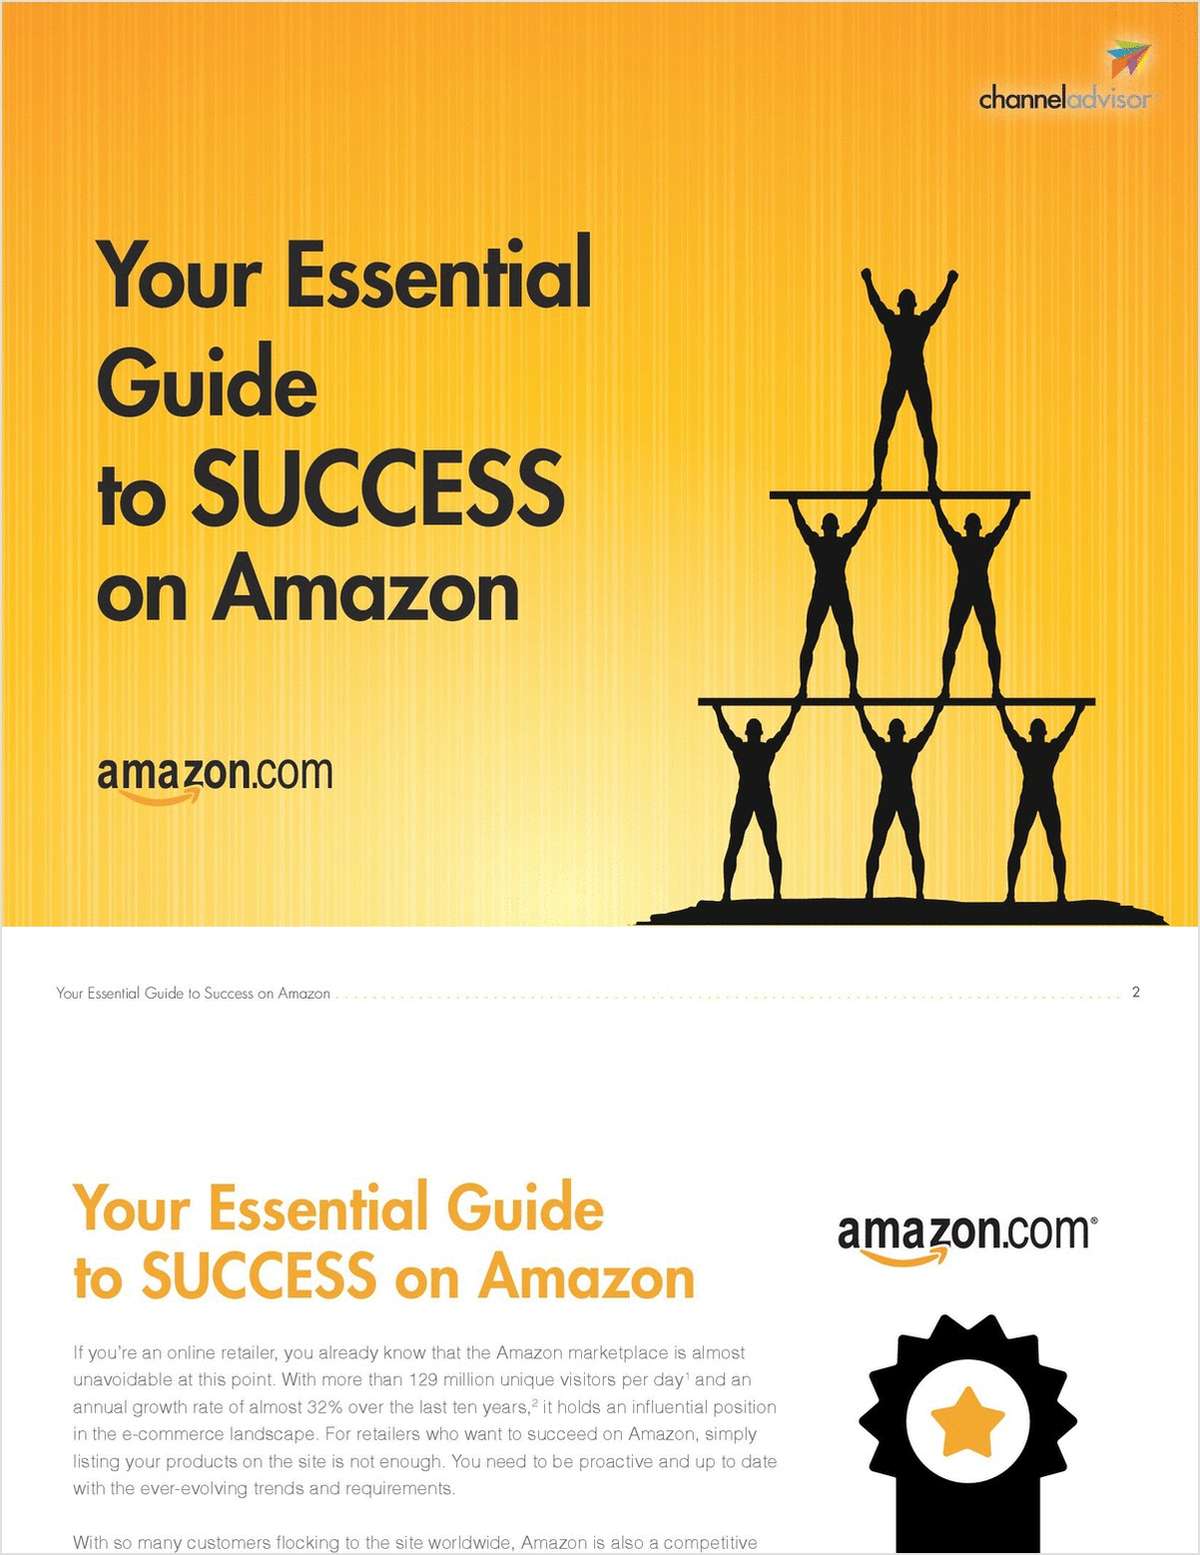 Your Essential Guide to Success on Amazon